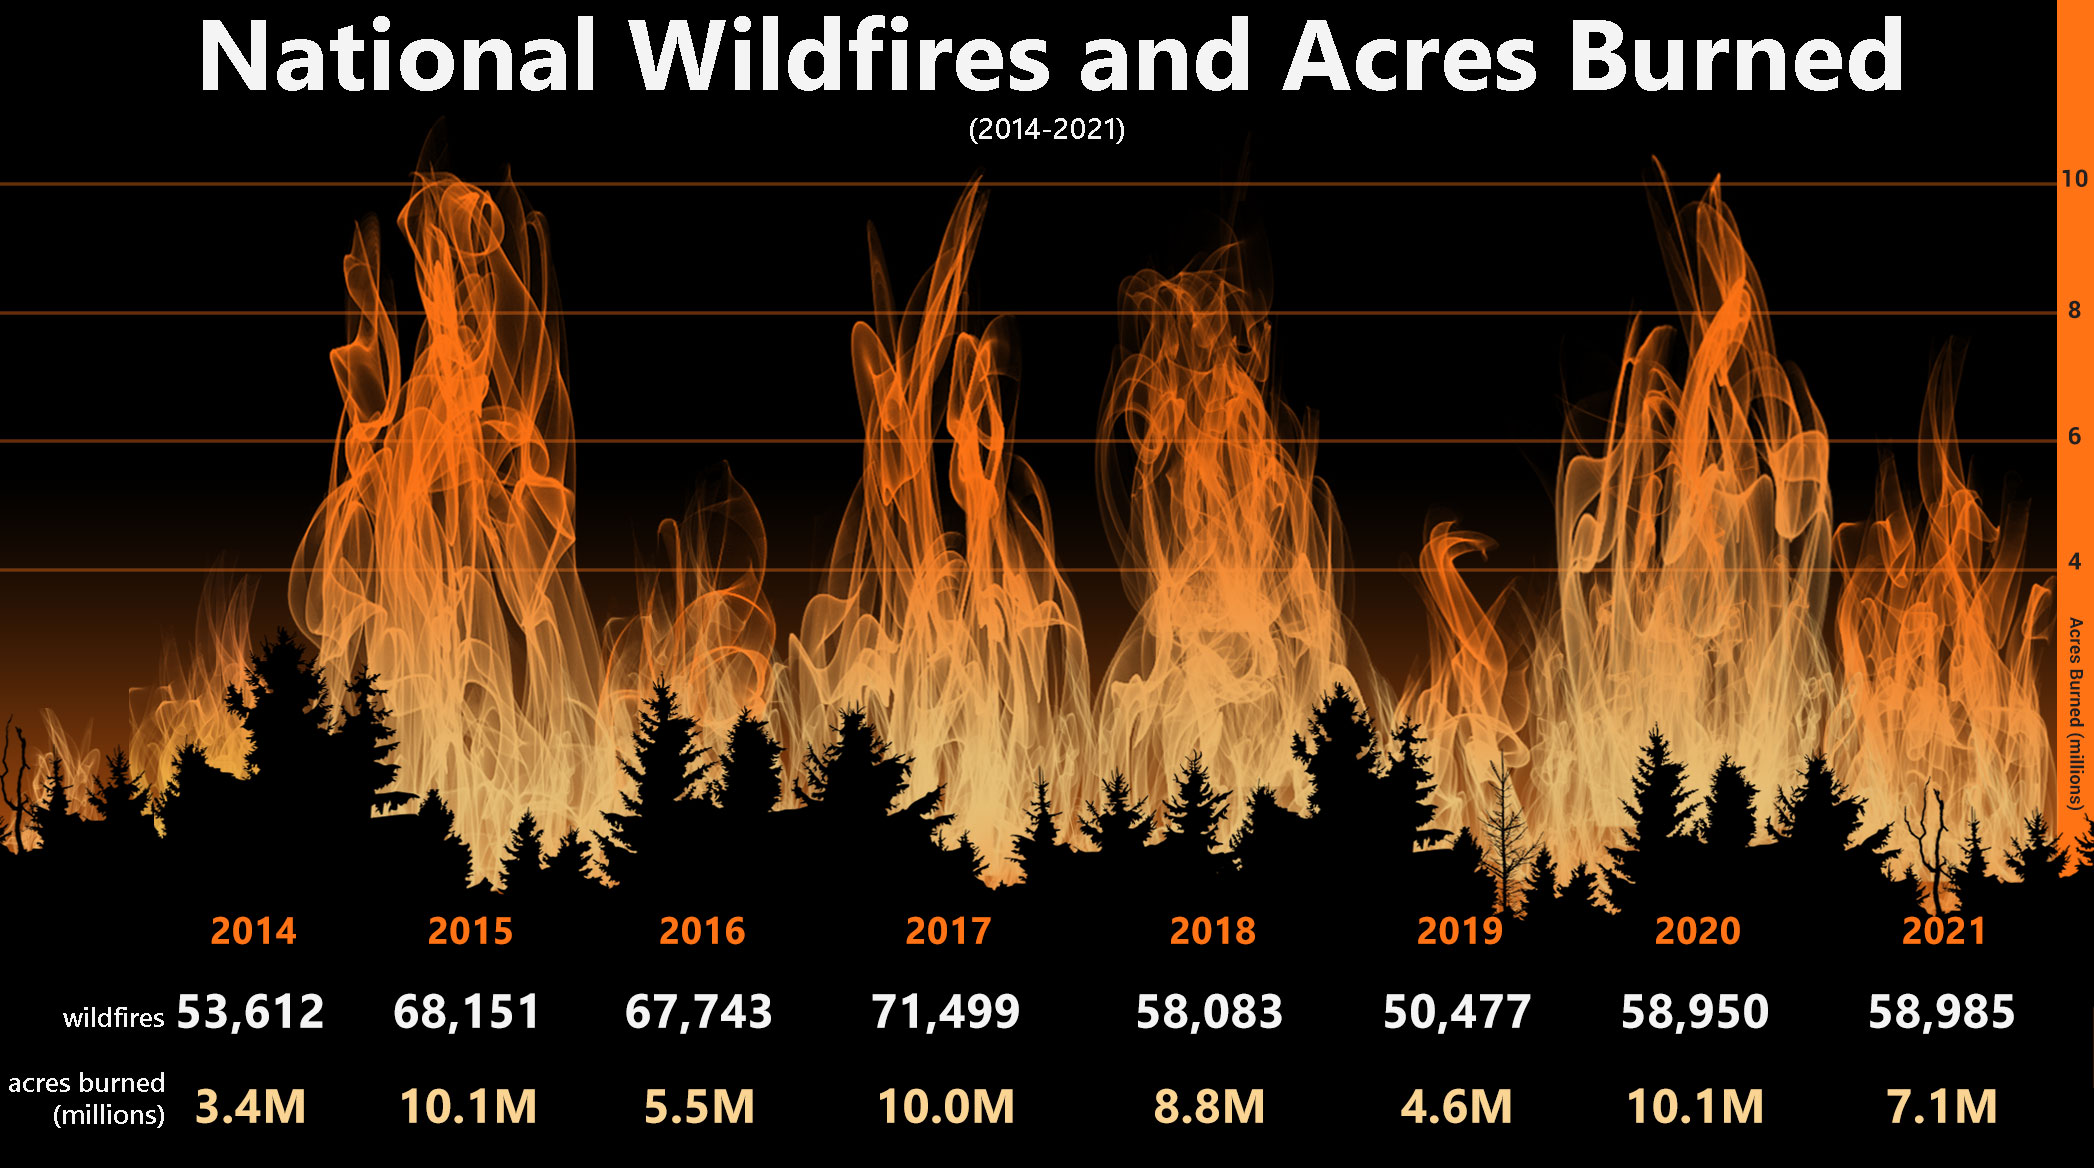 National Wildfires and Acres Burned